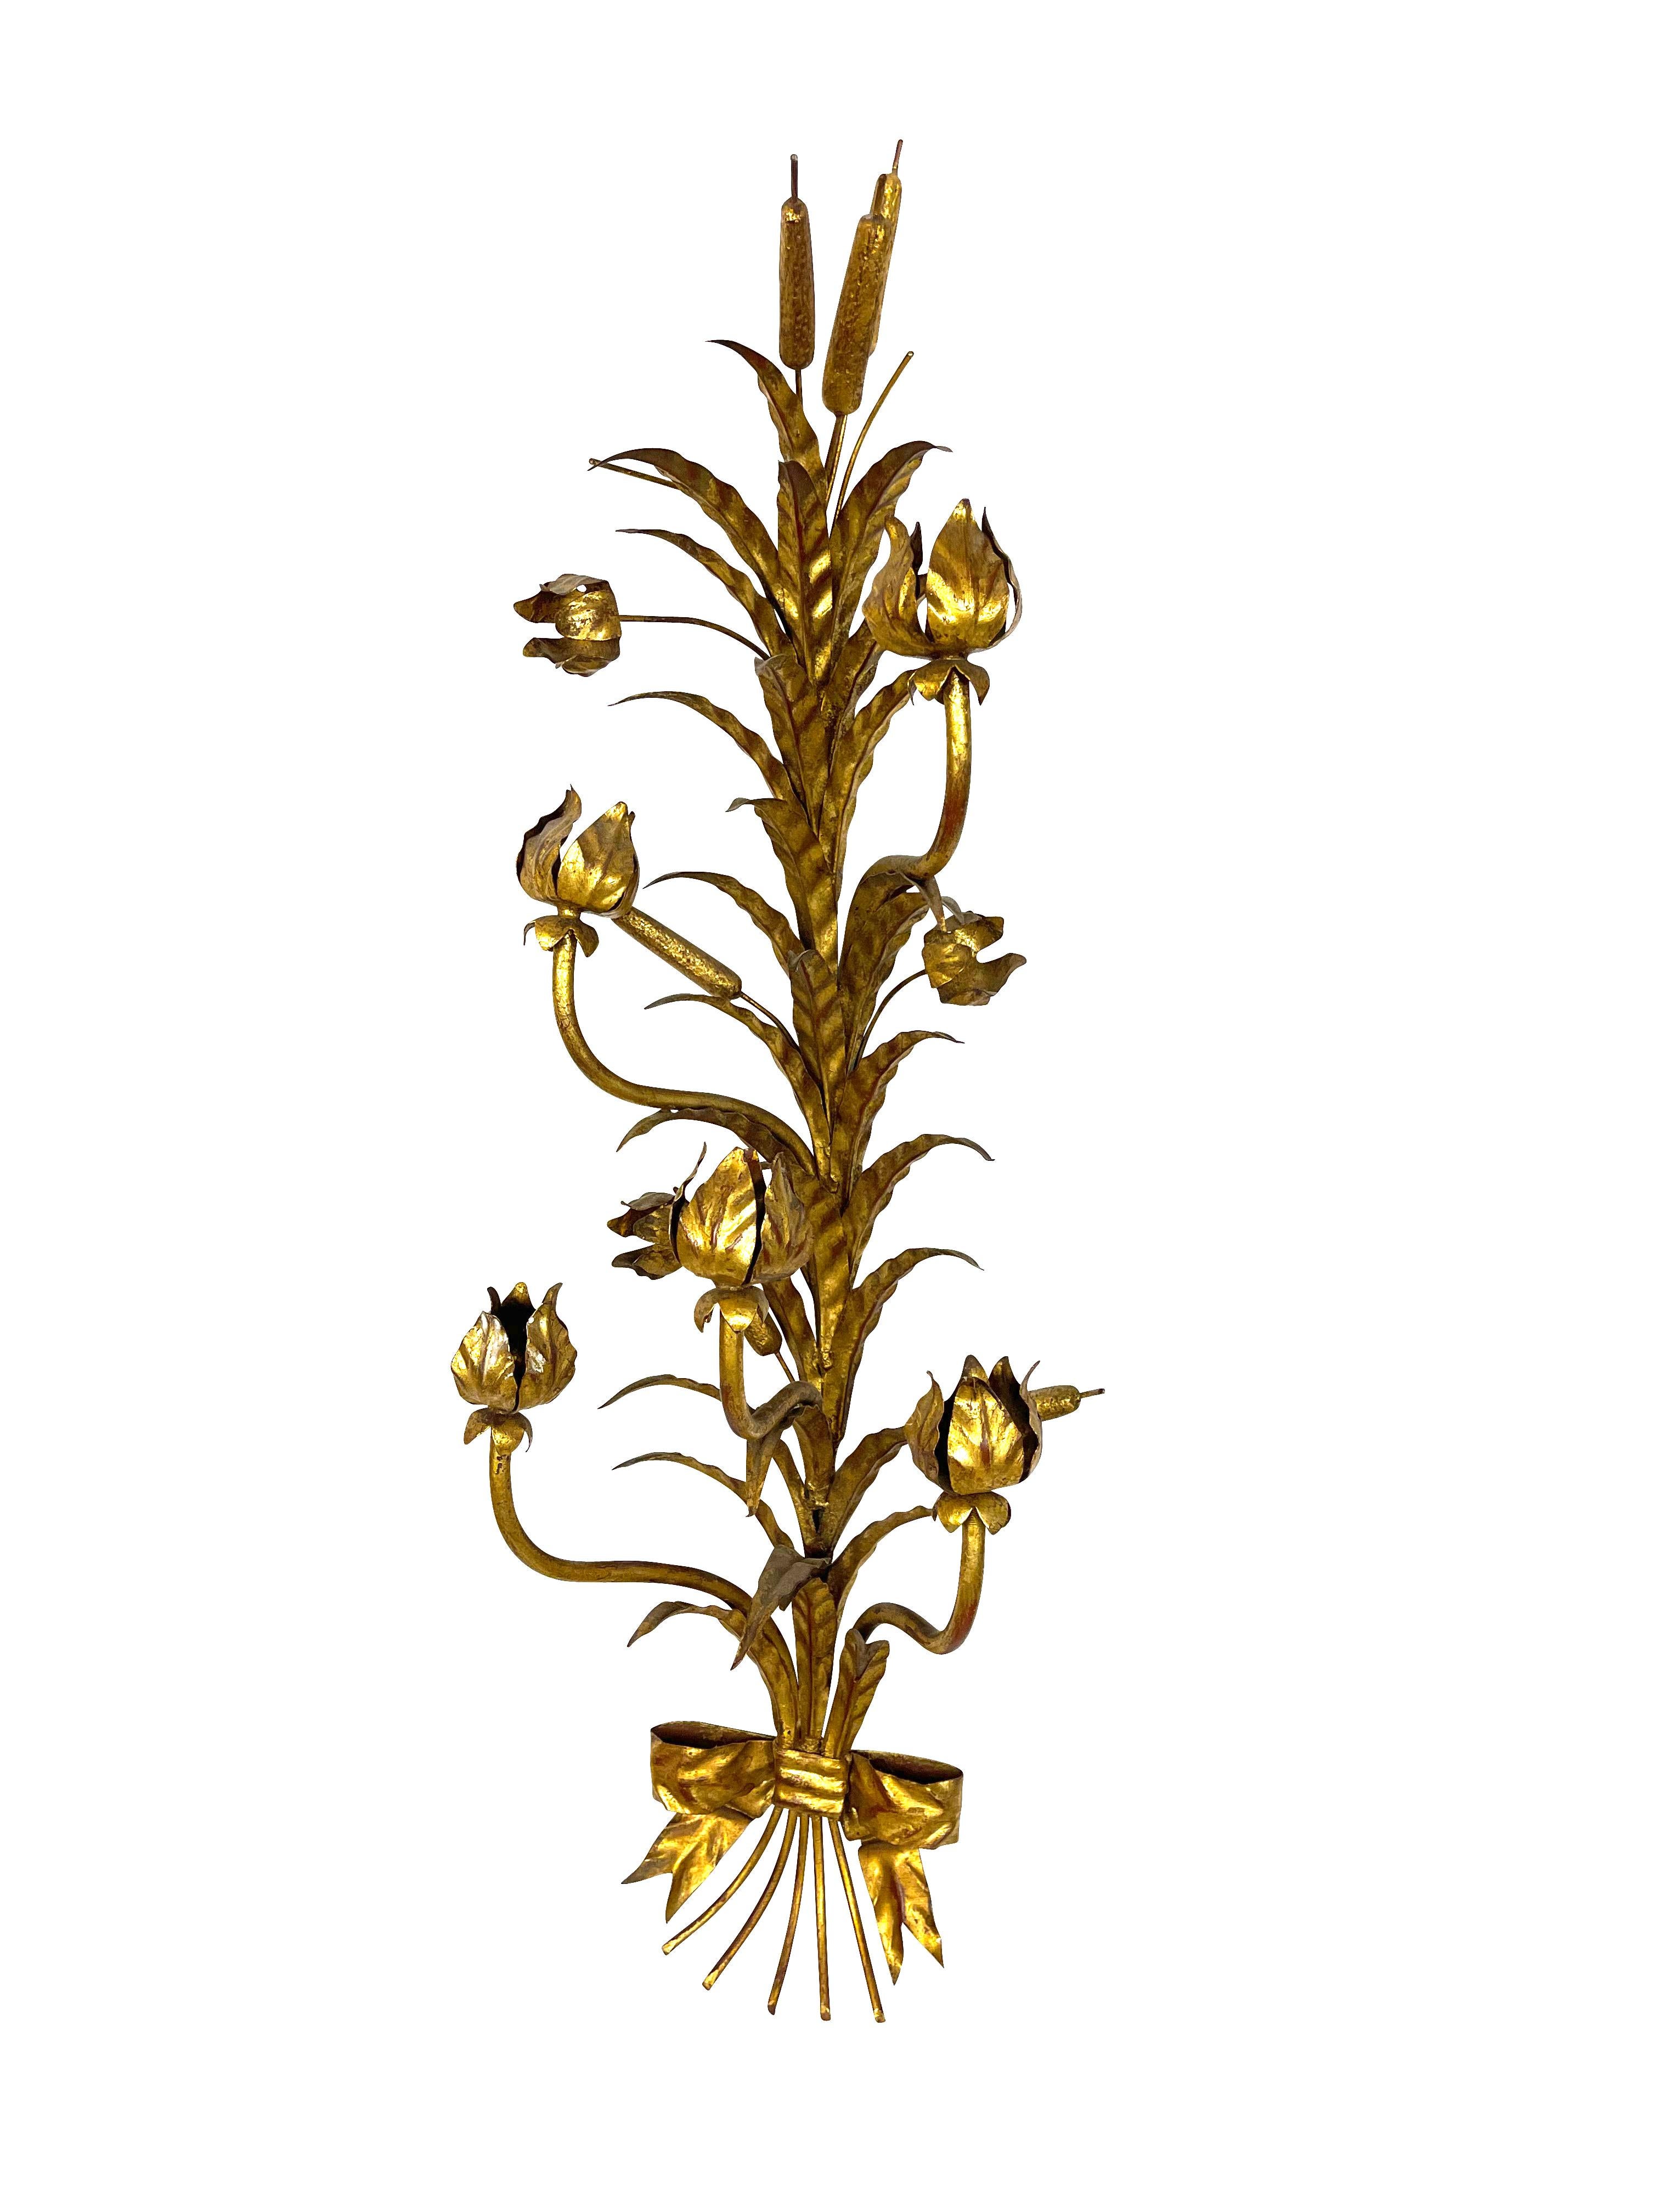 Pair of decorative Italian gilt metal candle sconces with bulrush motif and bow decoration at the base. Candle holders are flower shaped with gilt petals and elegantly curved stems. Lovely on either side of a mirror. Free shipping in the continental